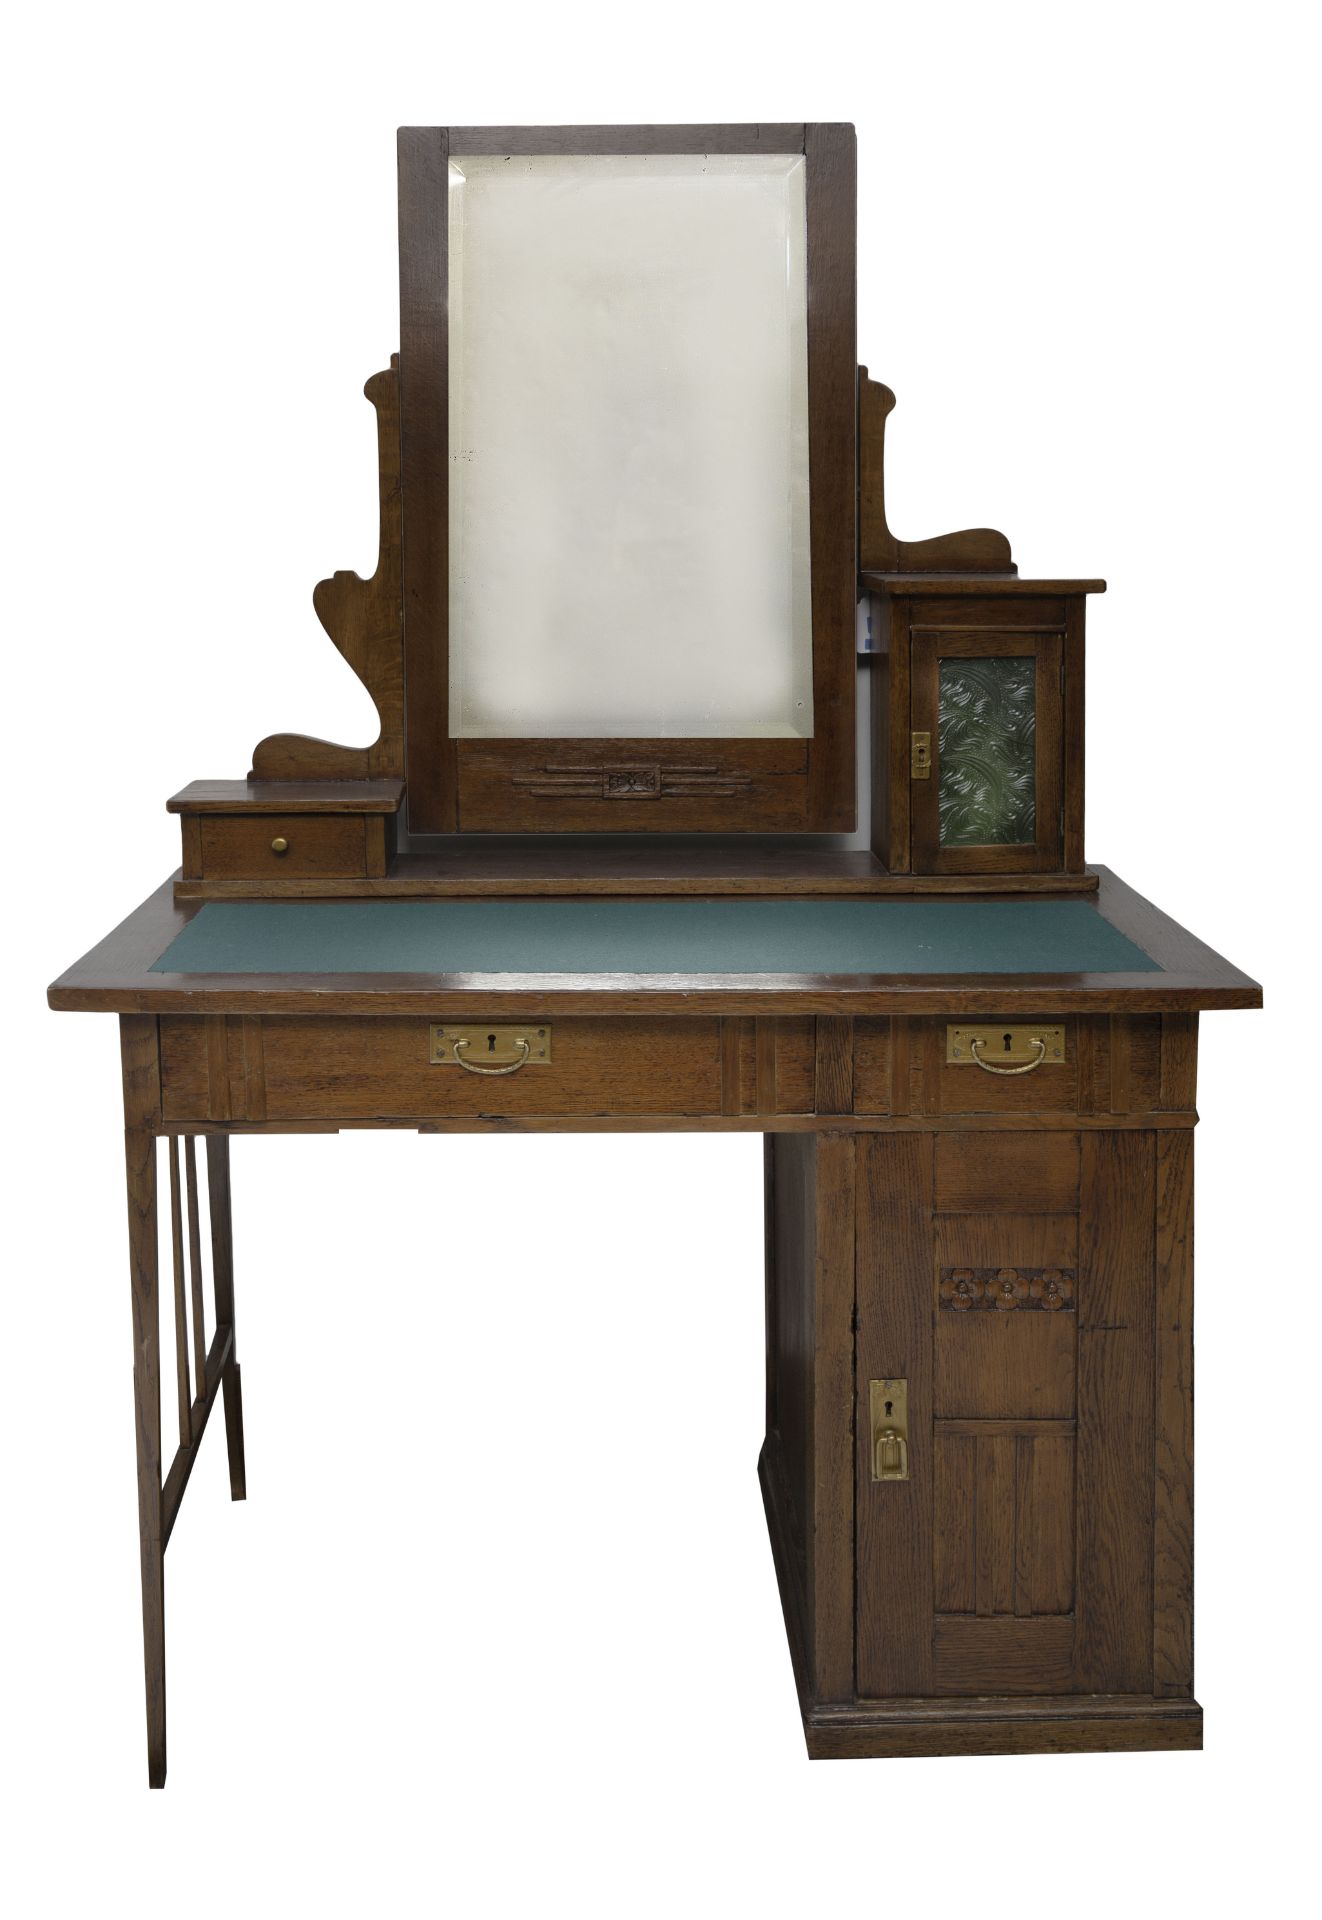 A WOOD VANITY TABLE WITH FRAMED MIRROR, POSSIBLY RUSSIAN, LATE 19TH CENTURY